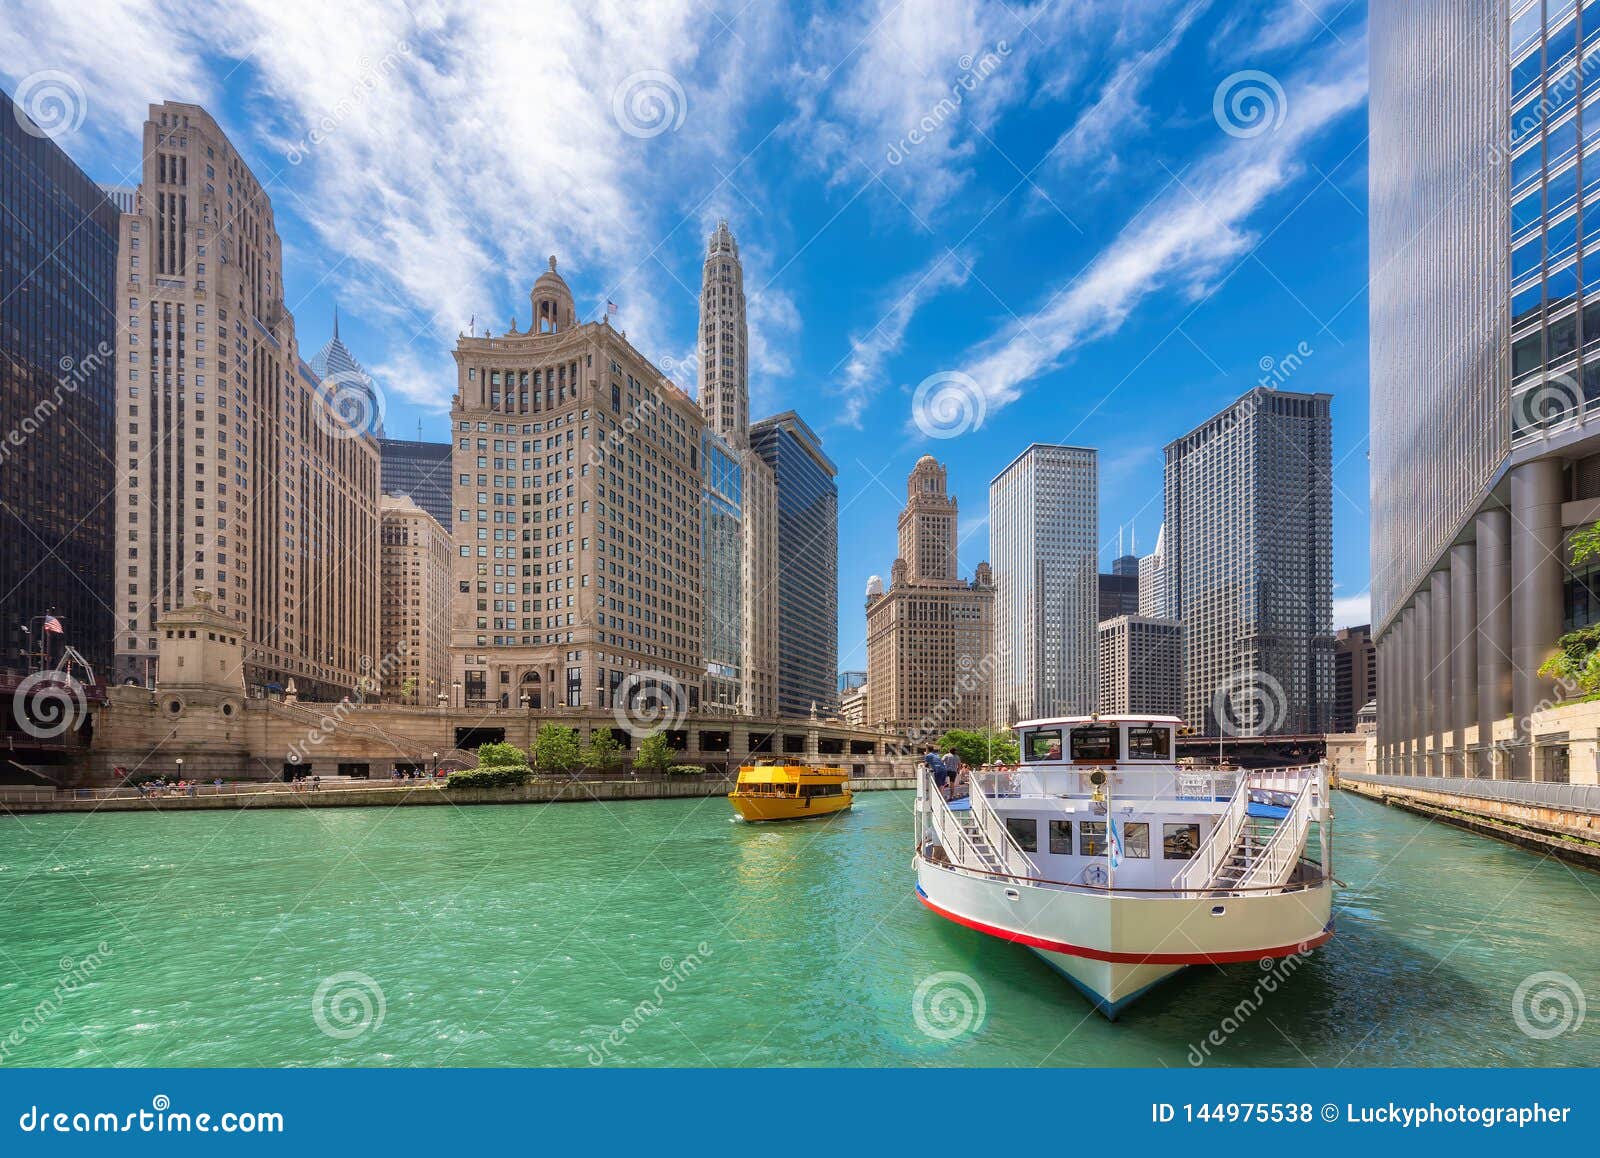 chicago downtown and chicago river at summer time in chicago, illinois.